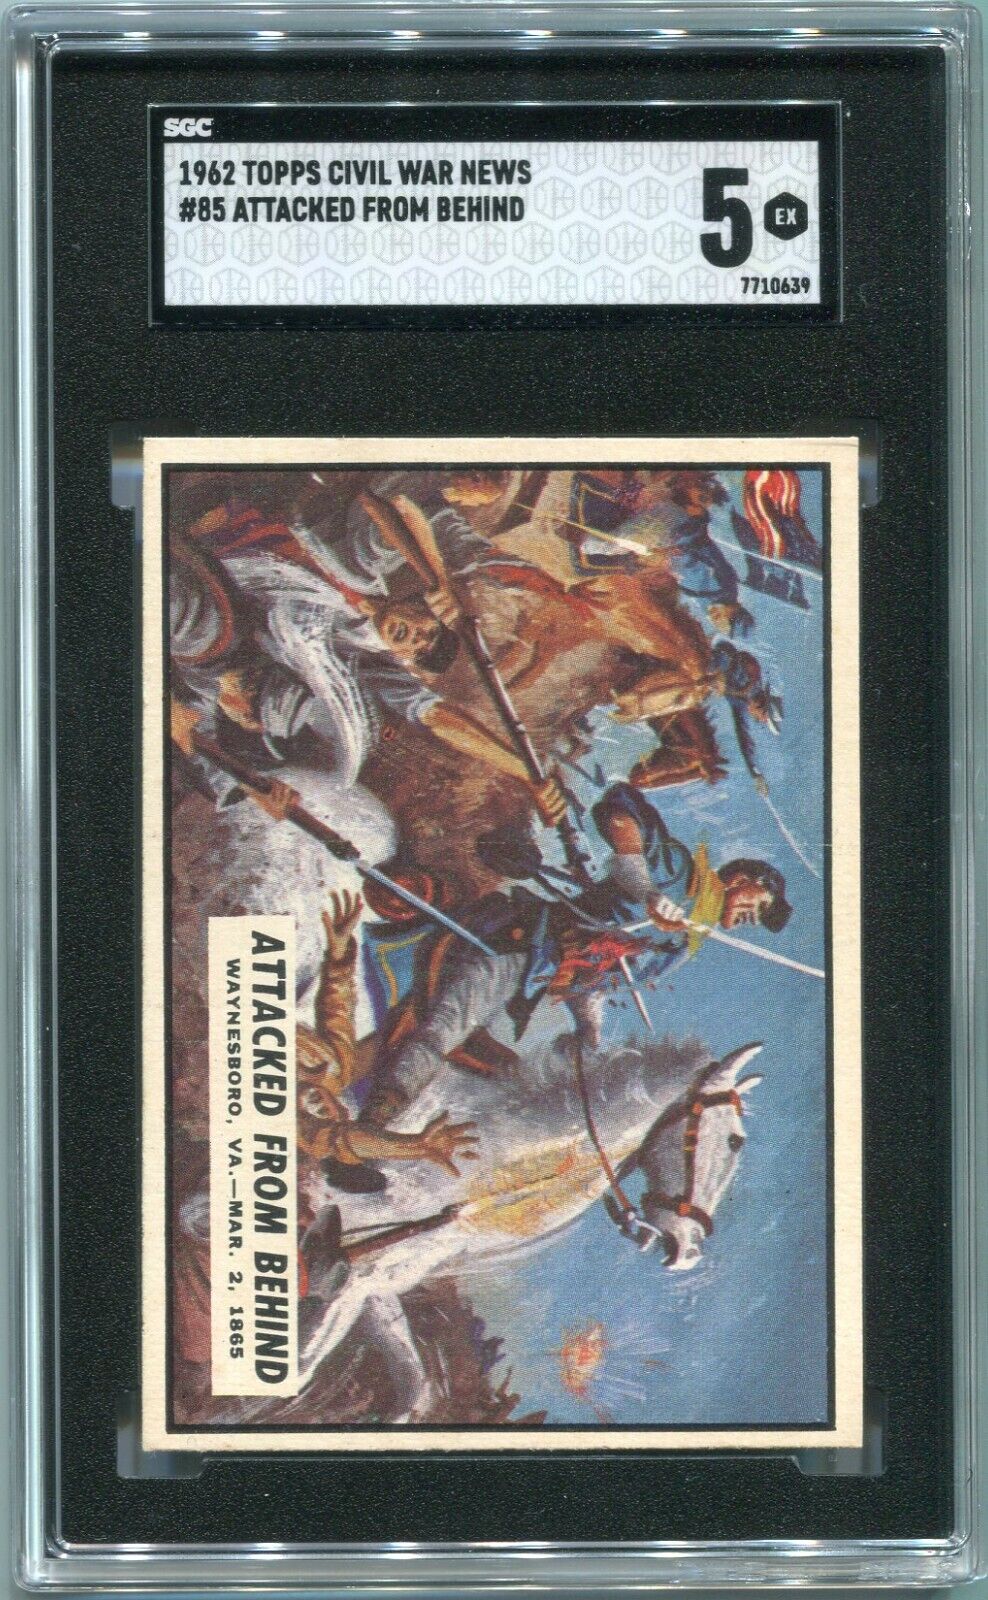 1962 Topps Civil War News #85 Attacked From Behind Graded SGC 5 EX Vintage Card